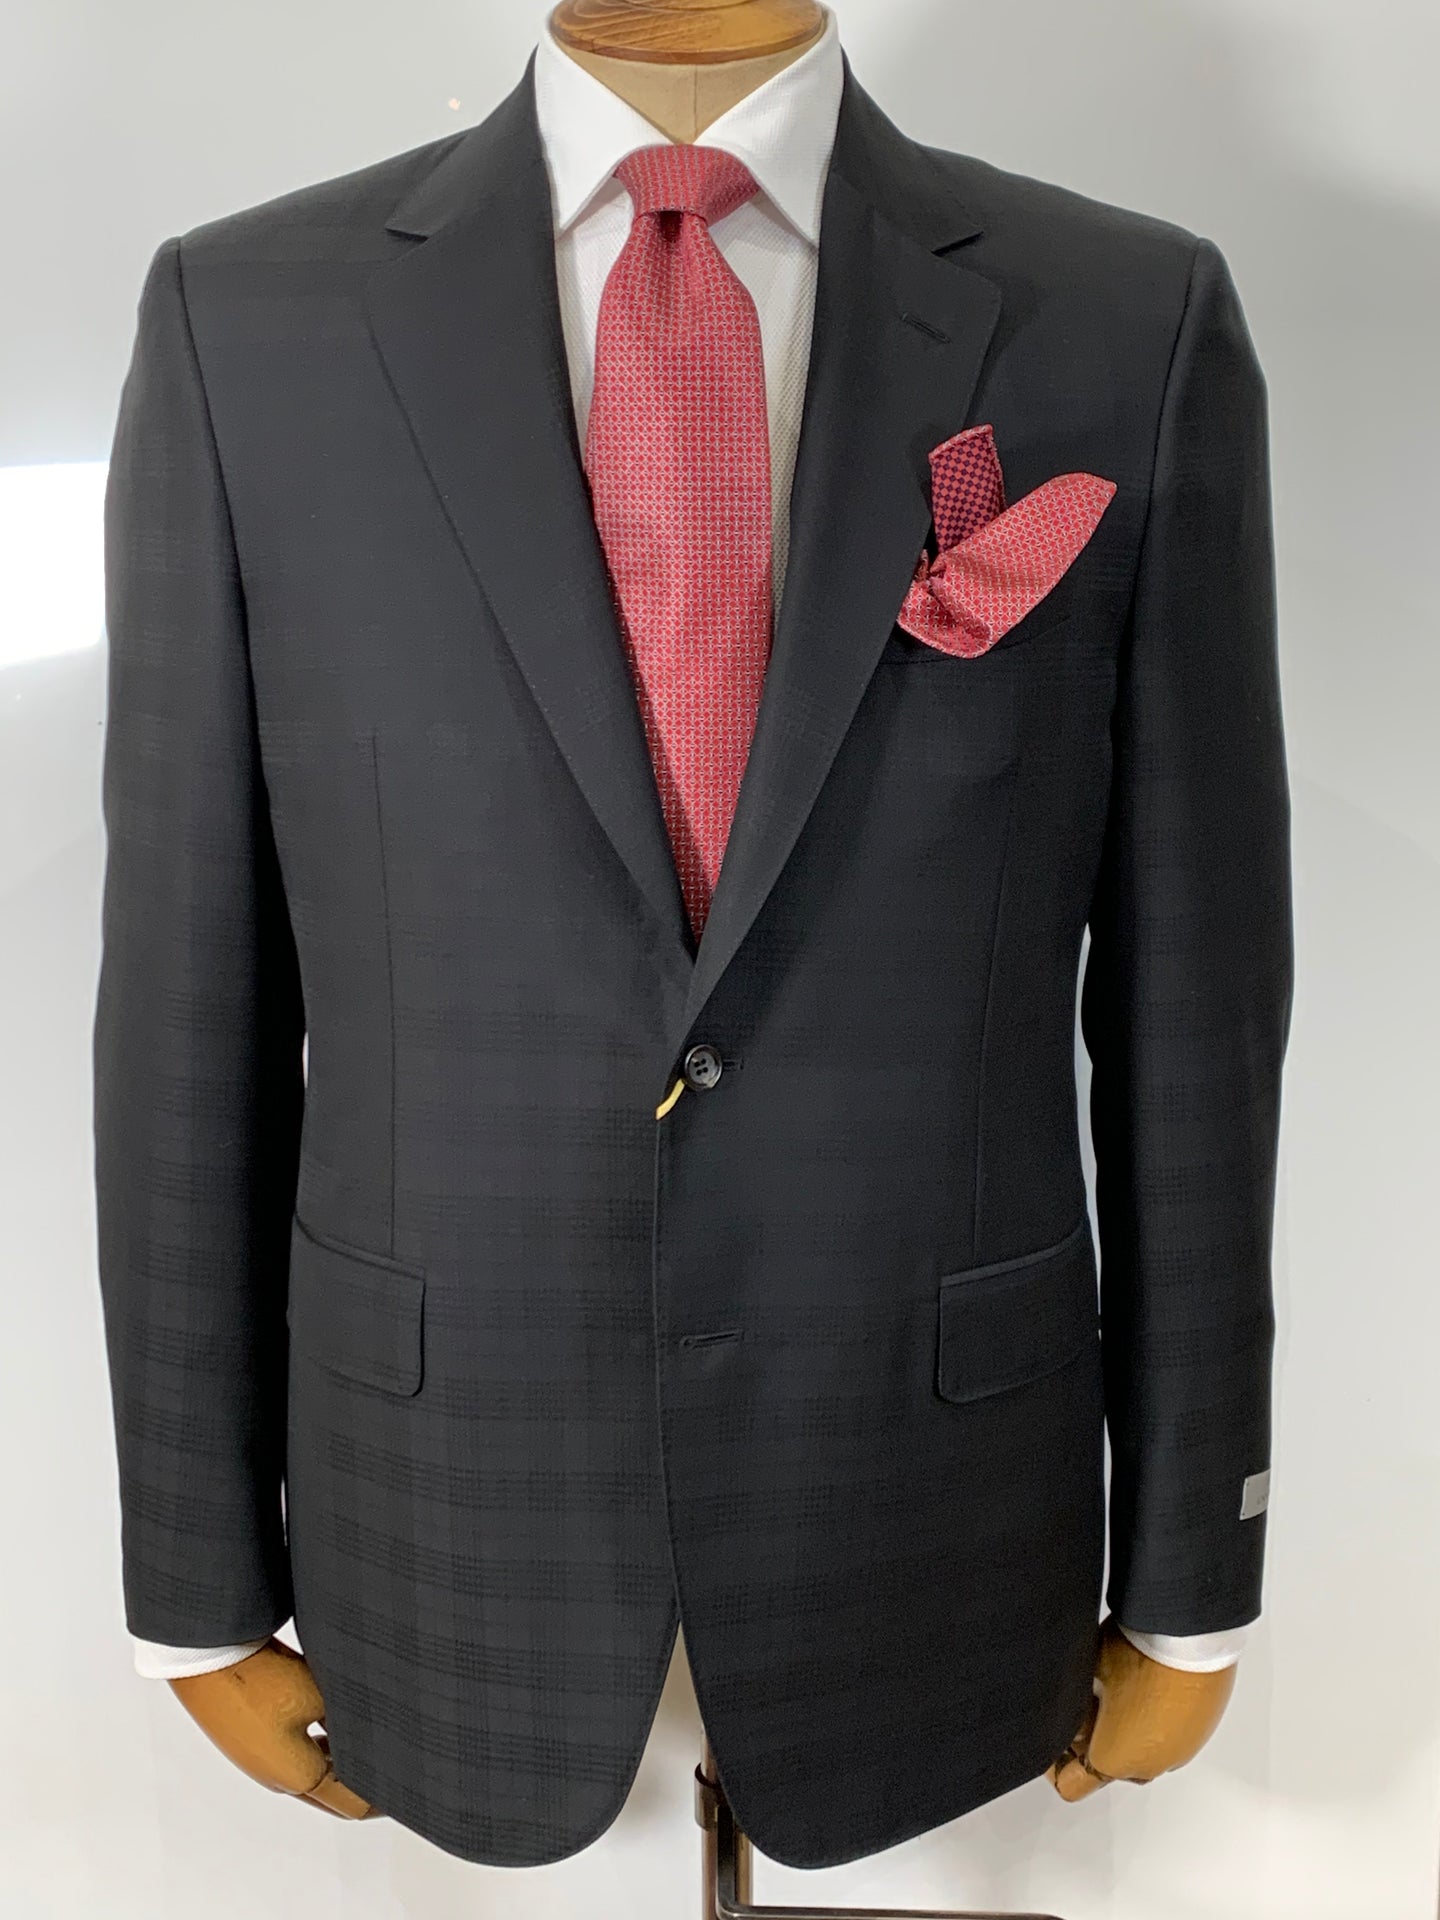 CONTEMPORY CHARCOAL SUIT BF02920/101 CHARCOAL WINDOW PAINED